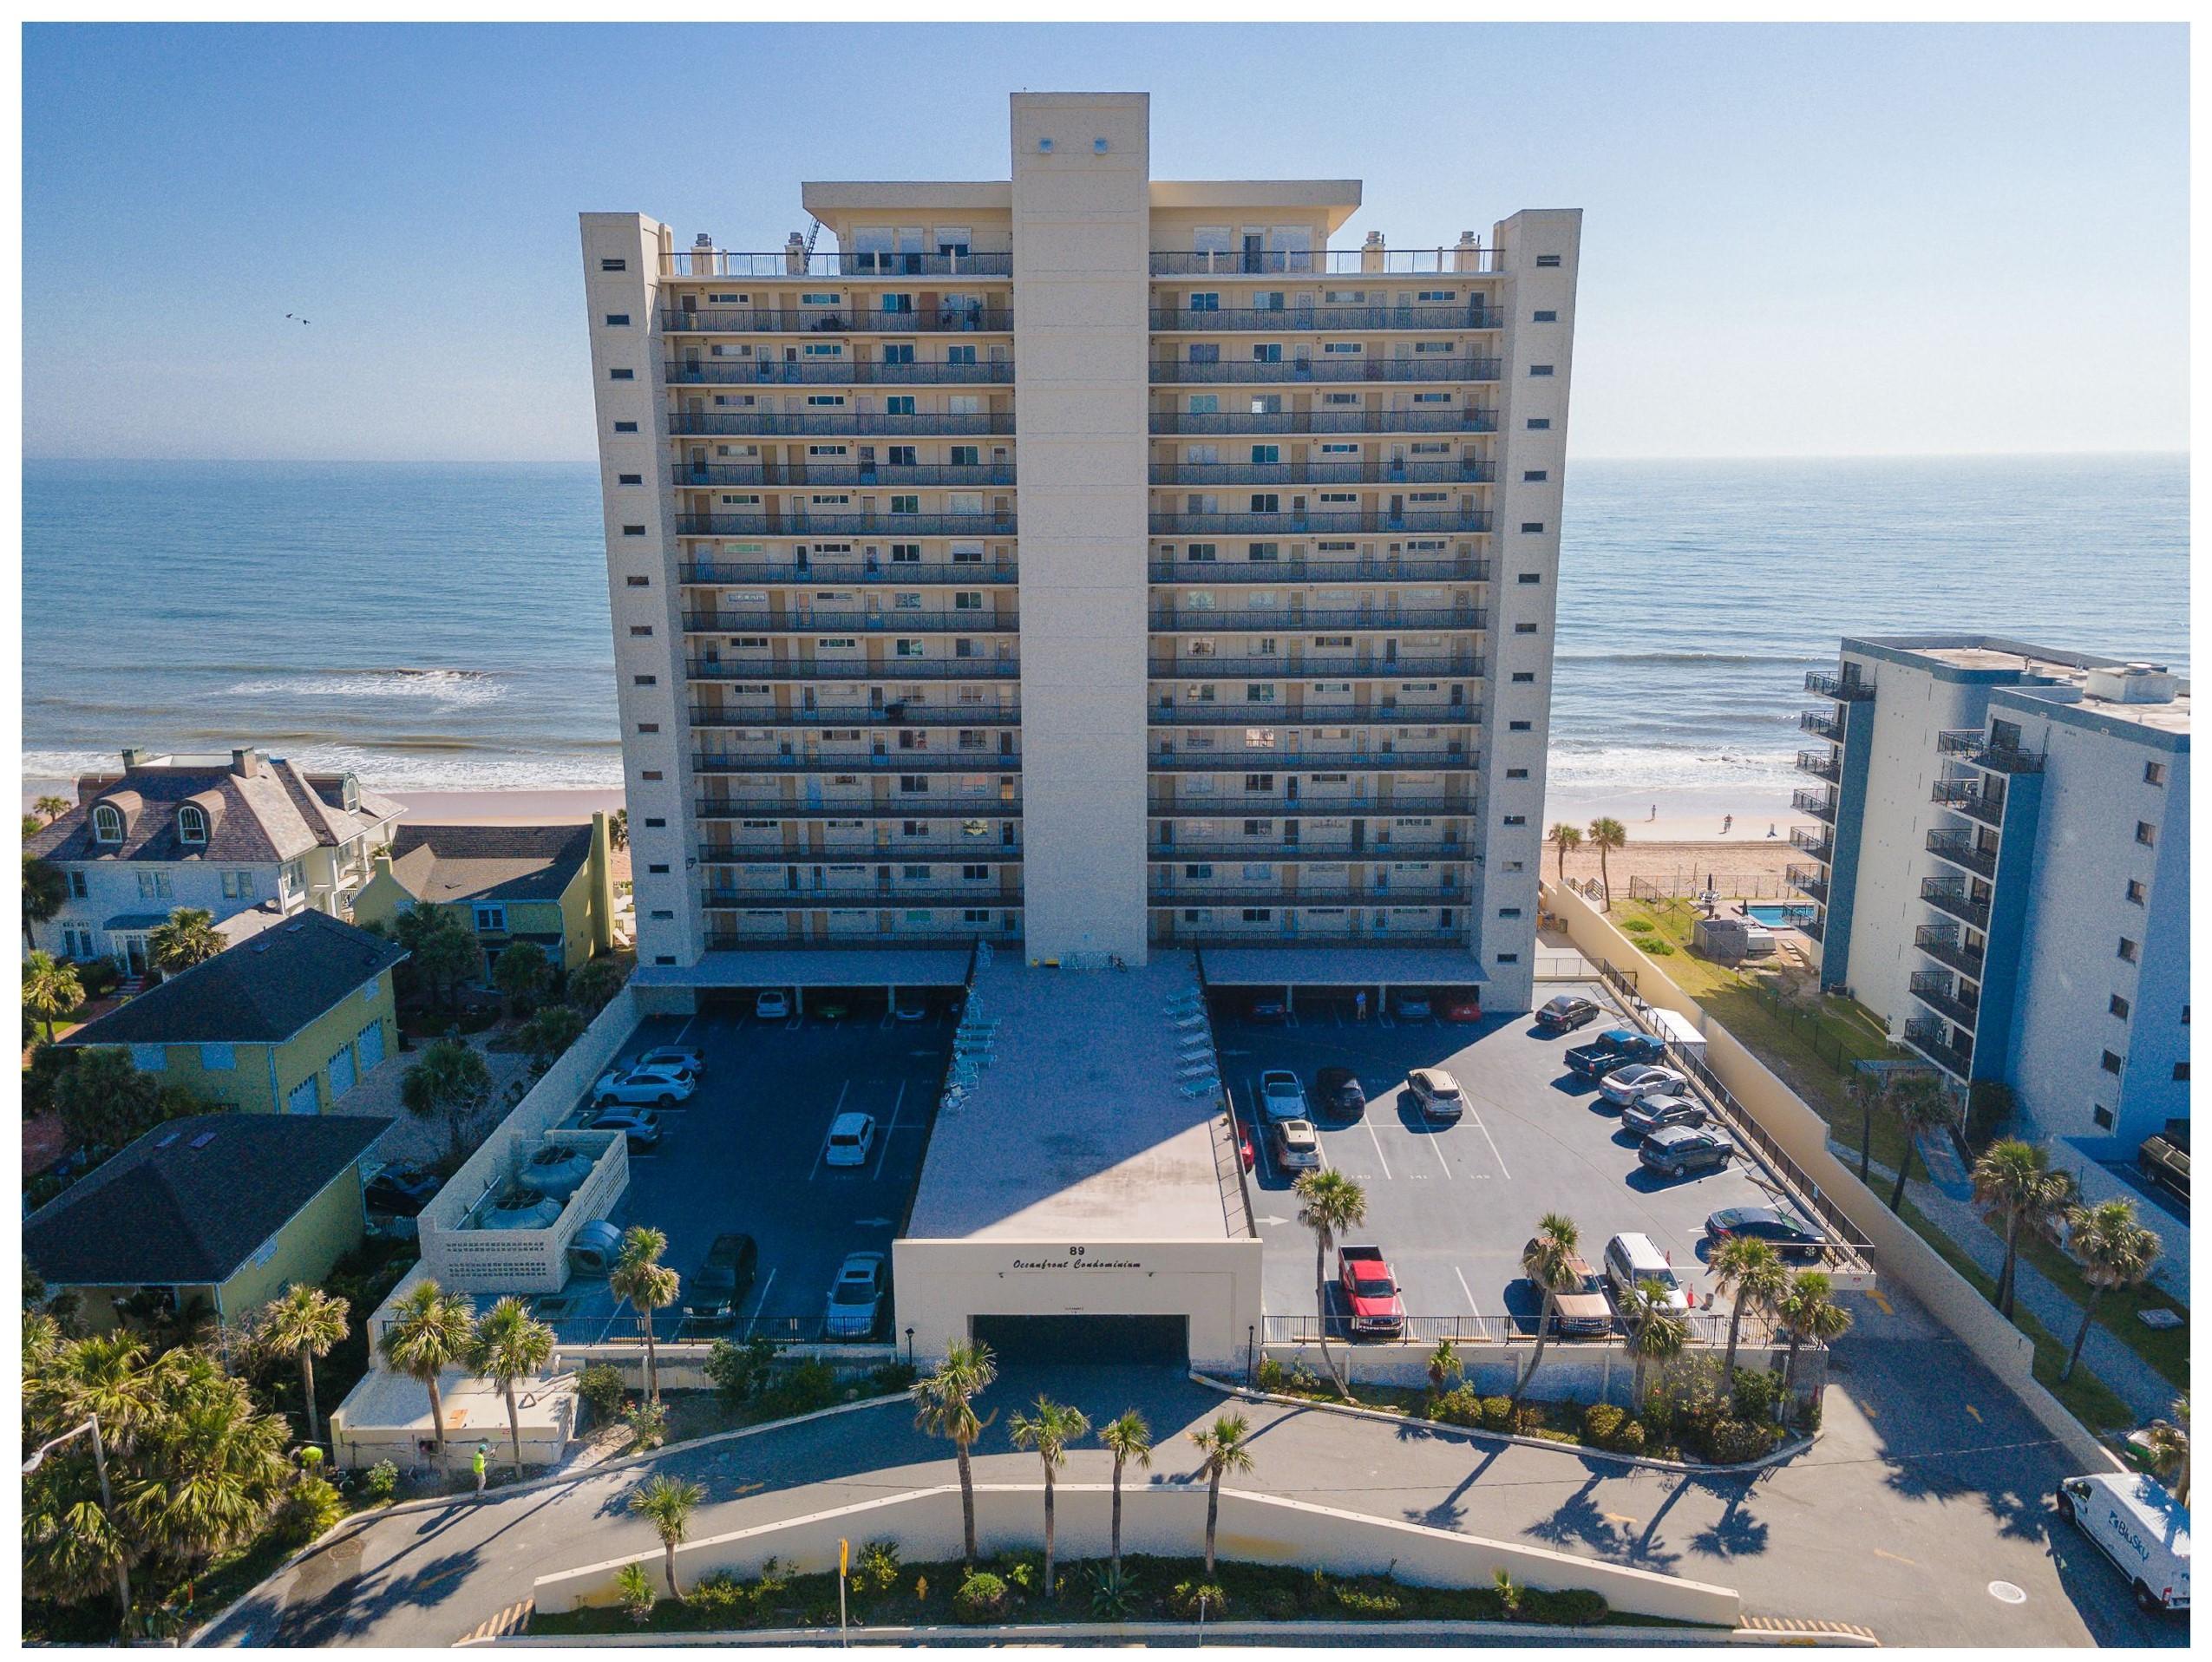 Property Image for 89 S Atlantic Ave 301